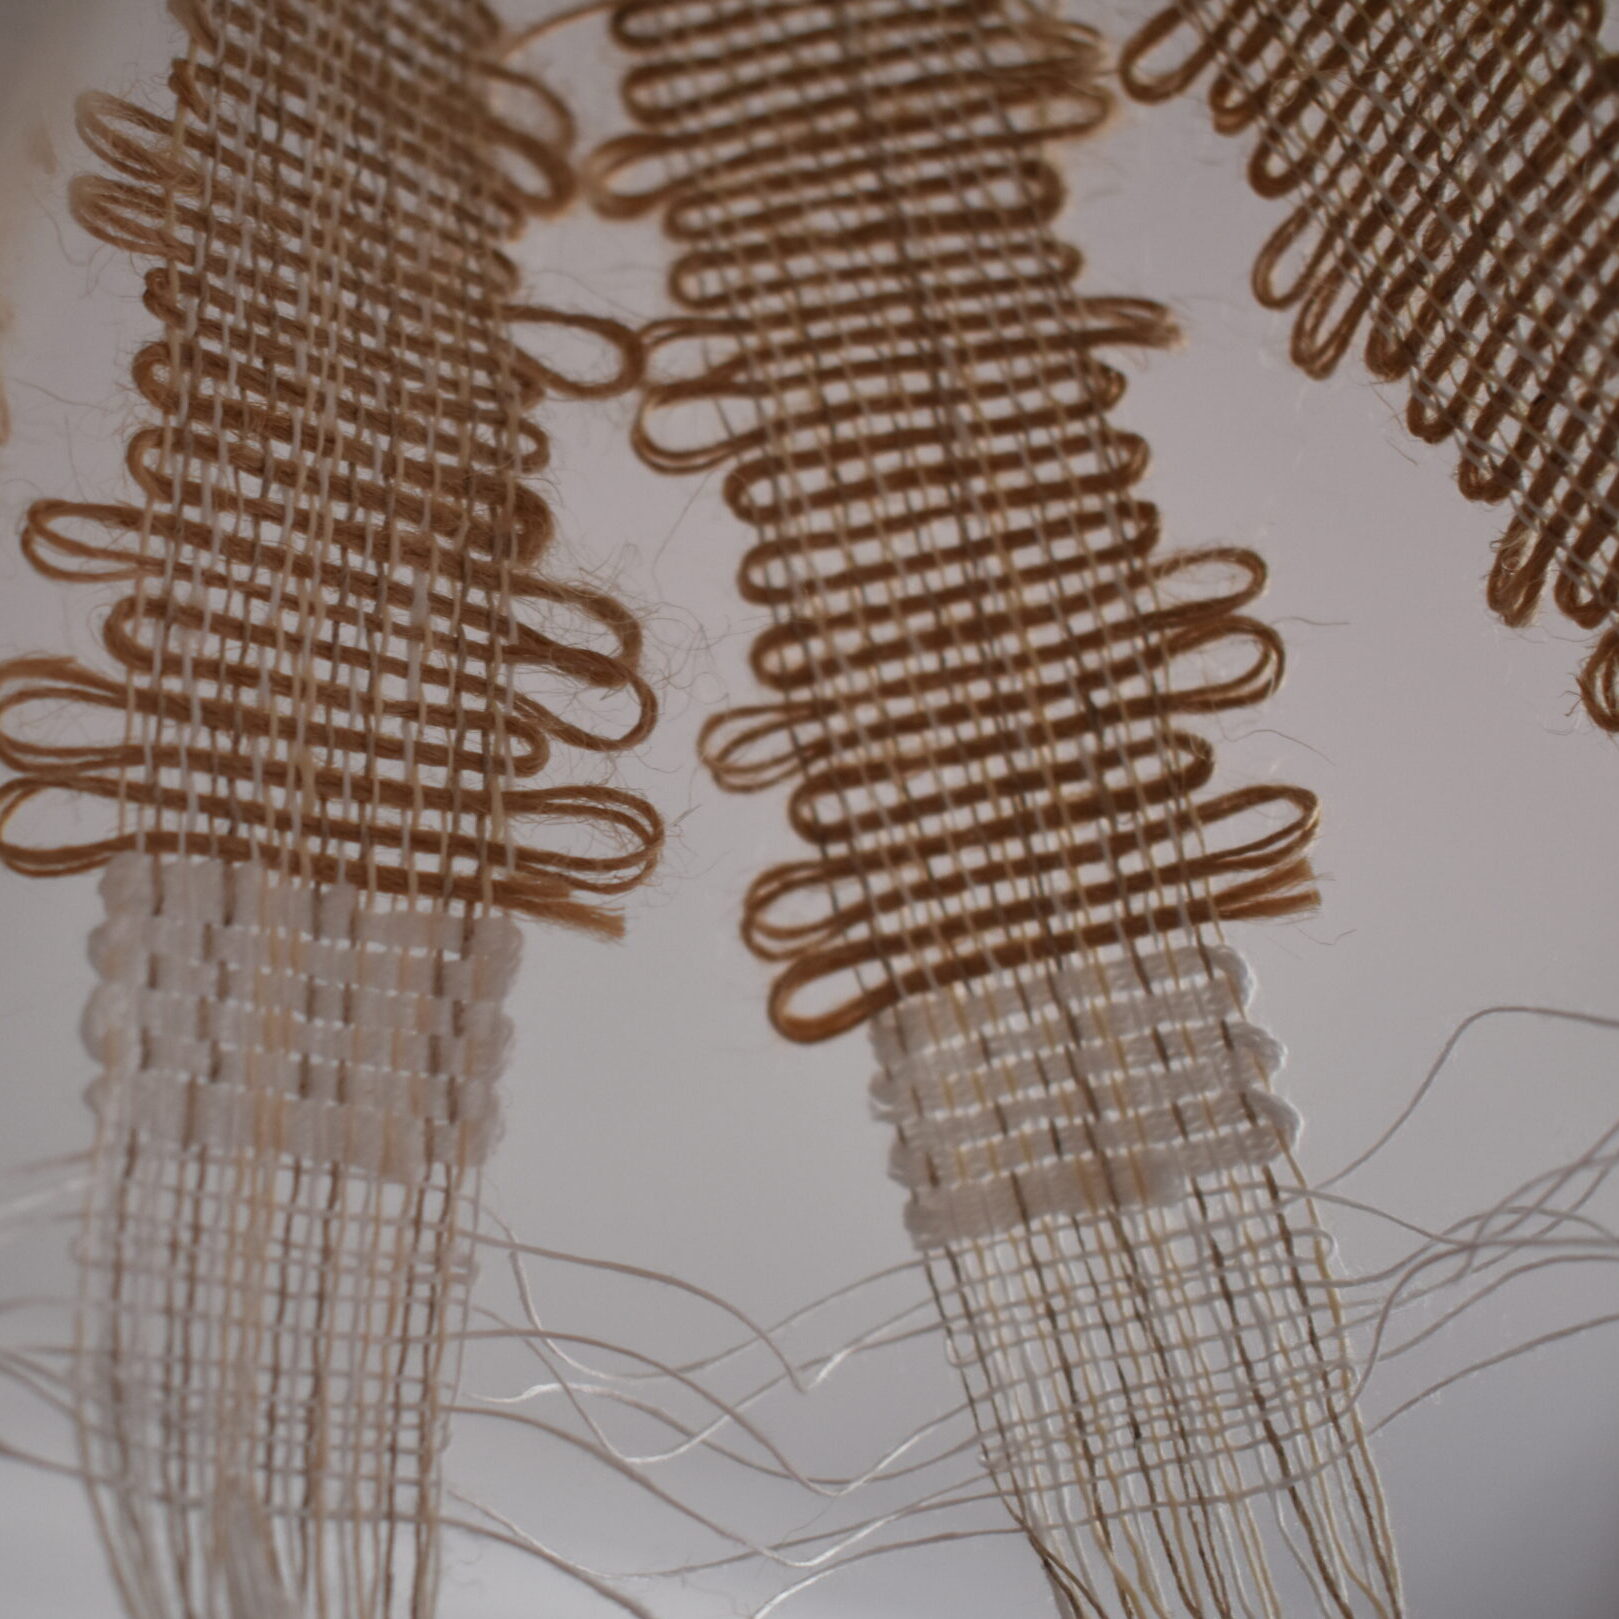 Close up image inside sculptural weave made from jute and linen